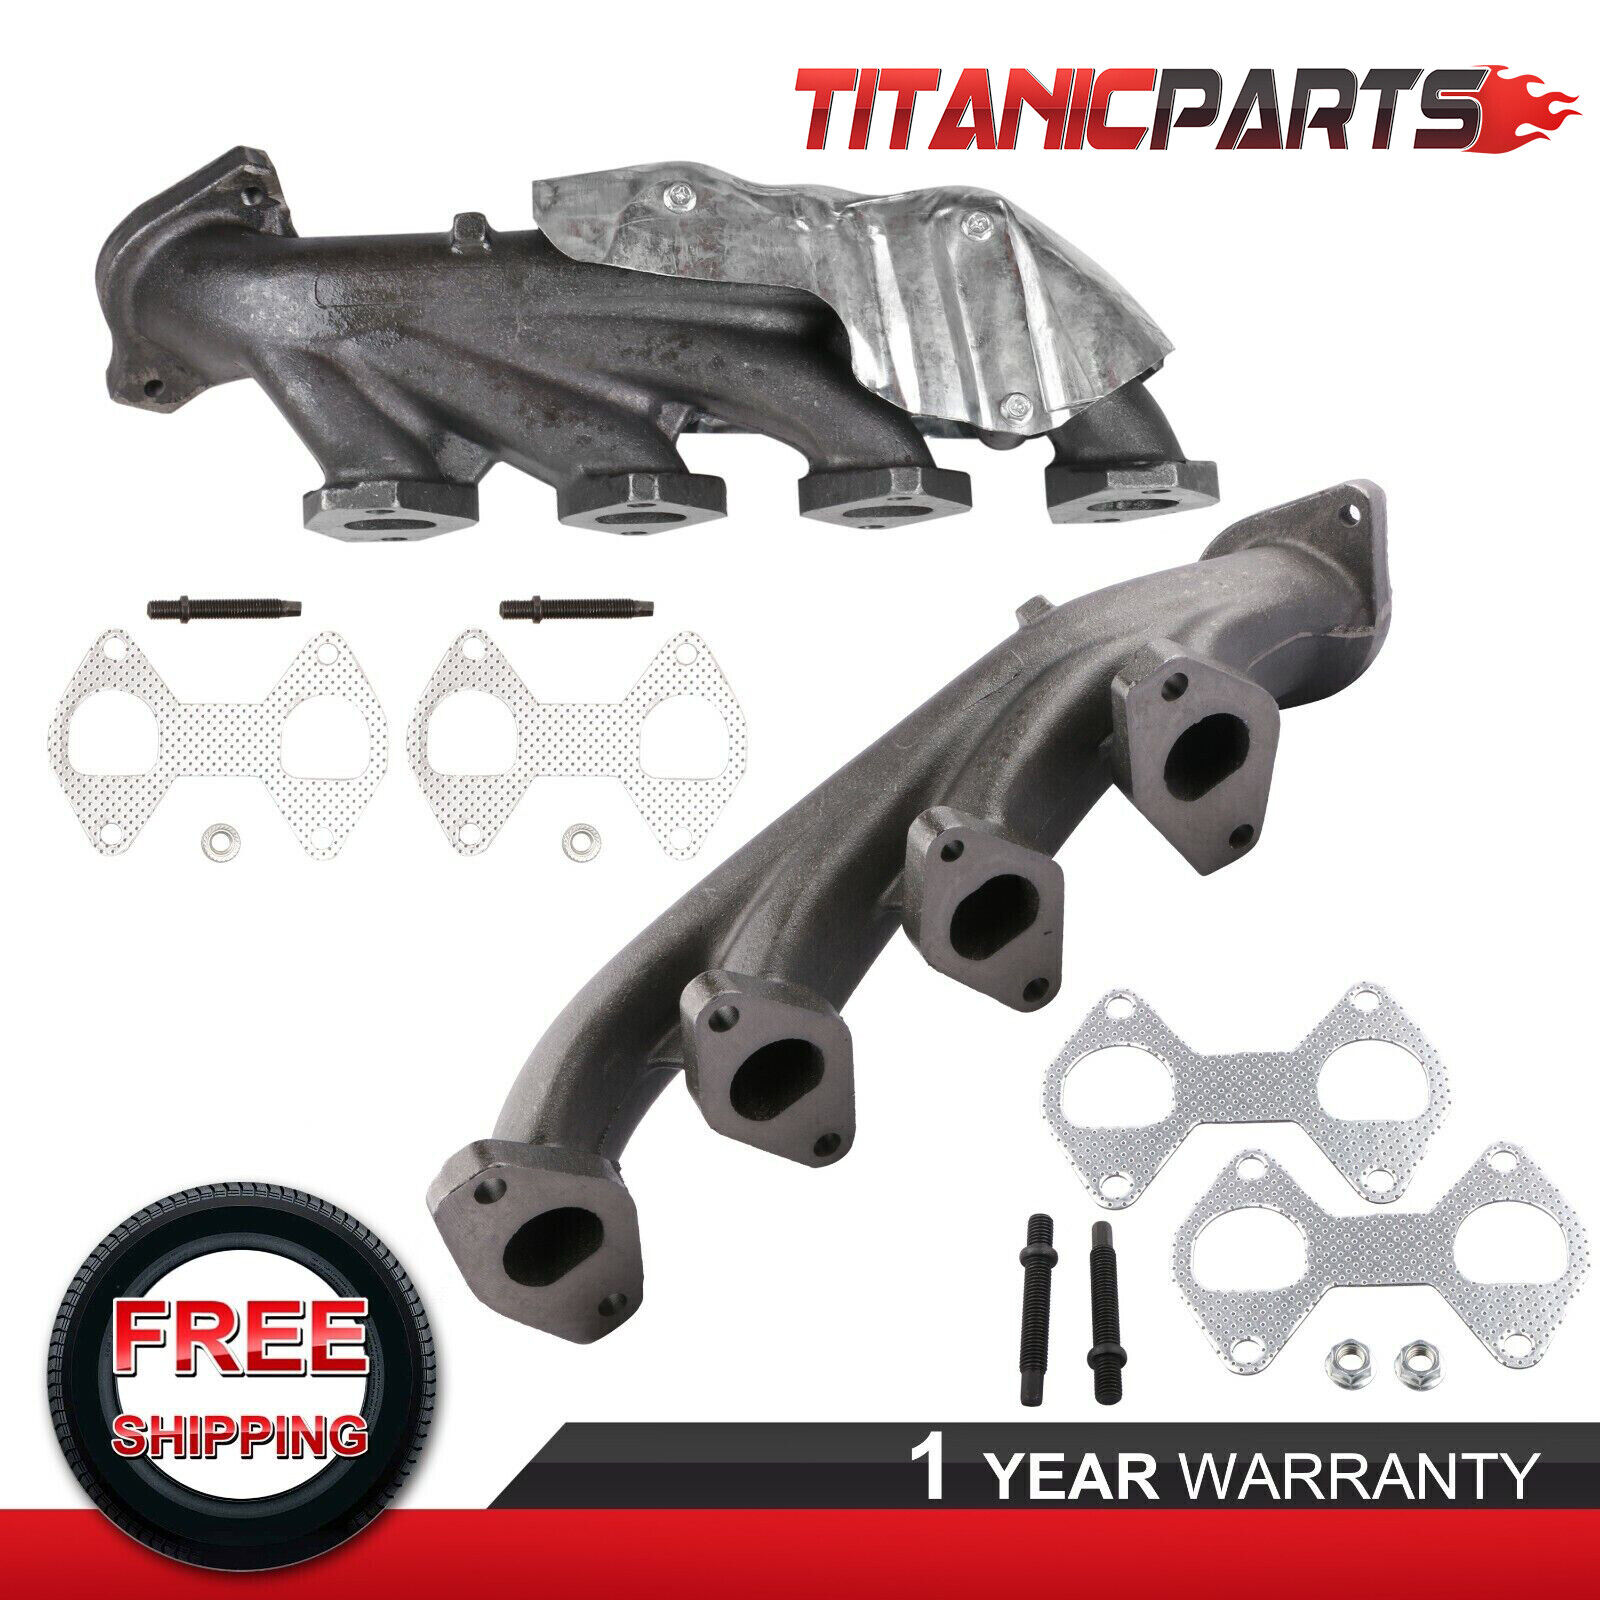 Left & Right Exhaust Manifold Kits For Ford F150 Expedition Lincoln Mark LT 5.4L